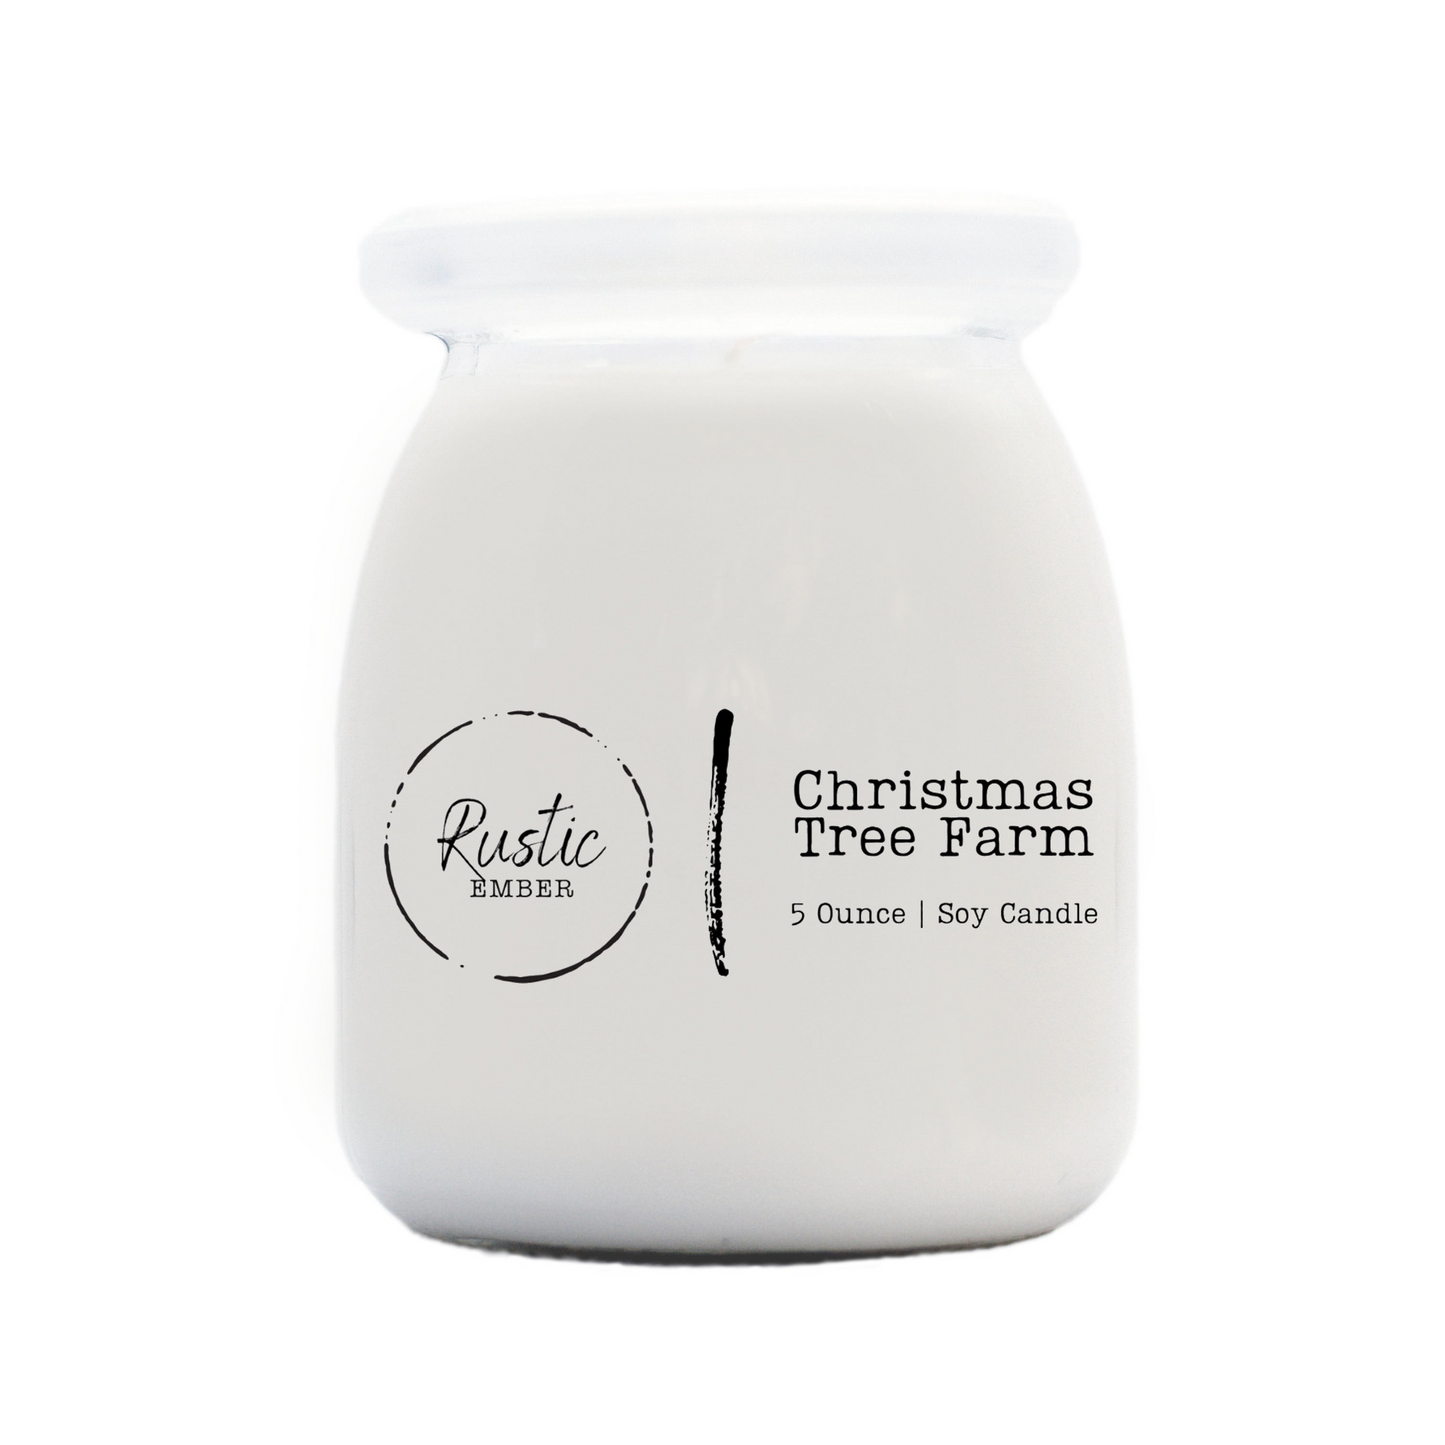 Christmas Tree Farm | 5 Ounce Candle | Rustic Ember